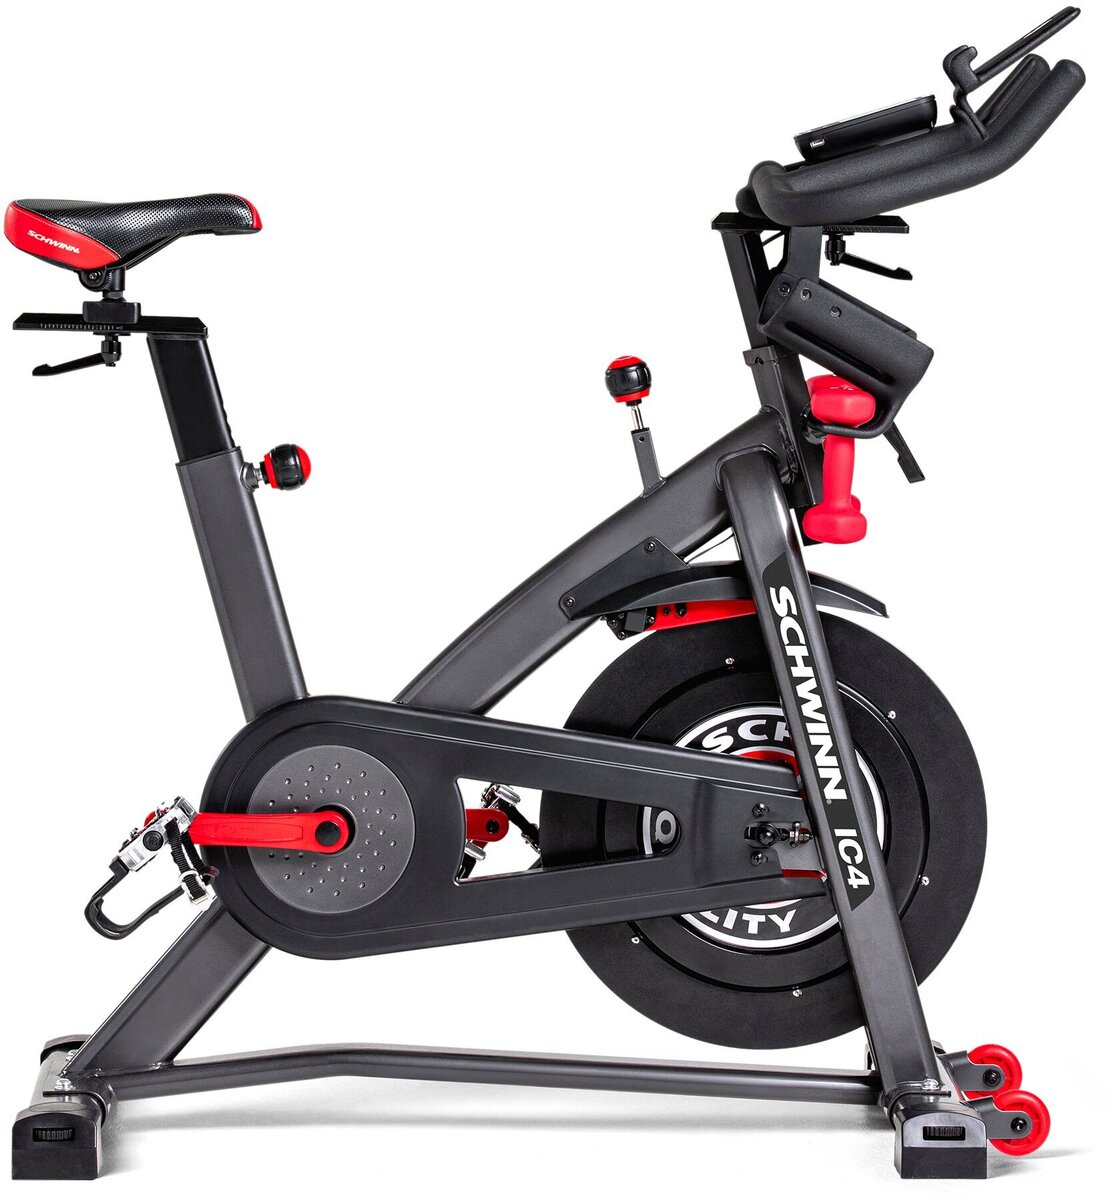 Schwinn Fitness Ic4 Indoor Cycling Bike Brings Cycling And Fitness